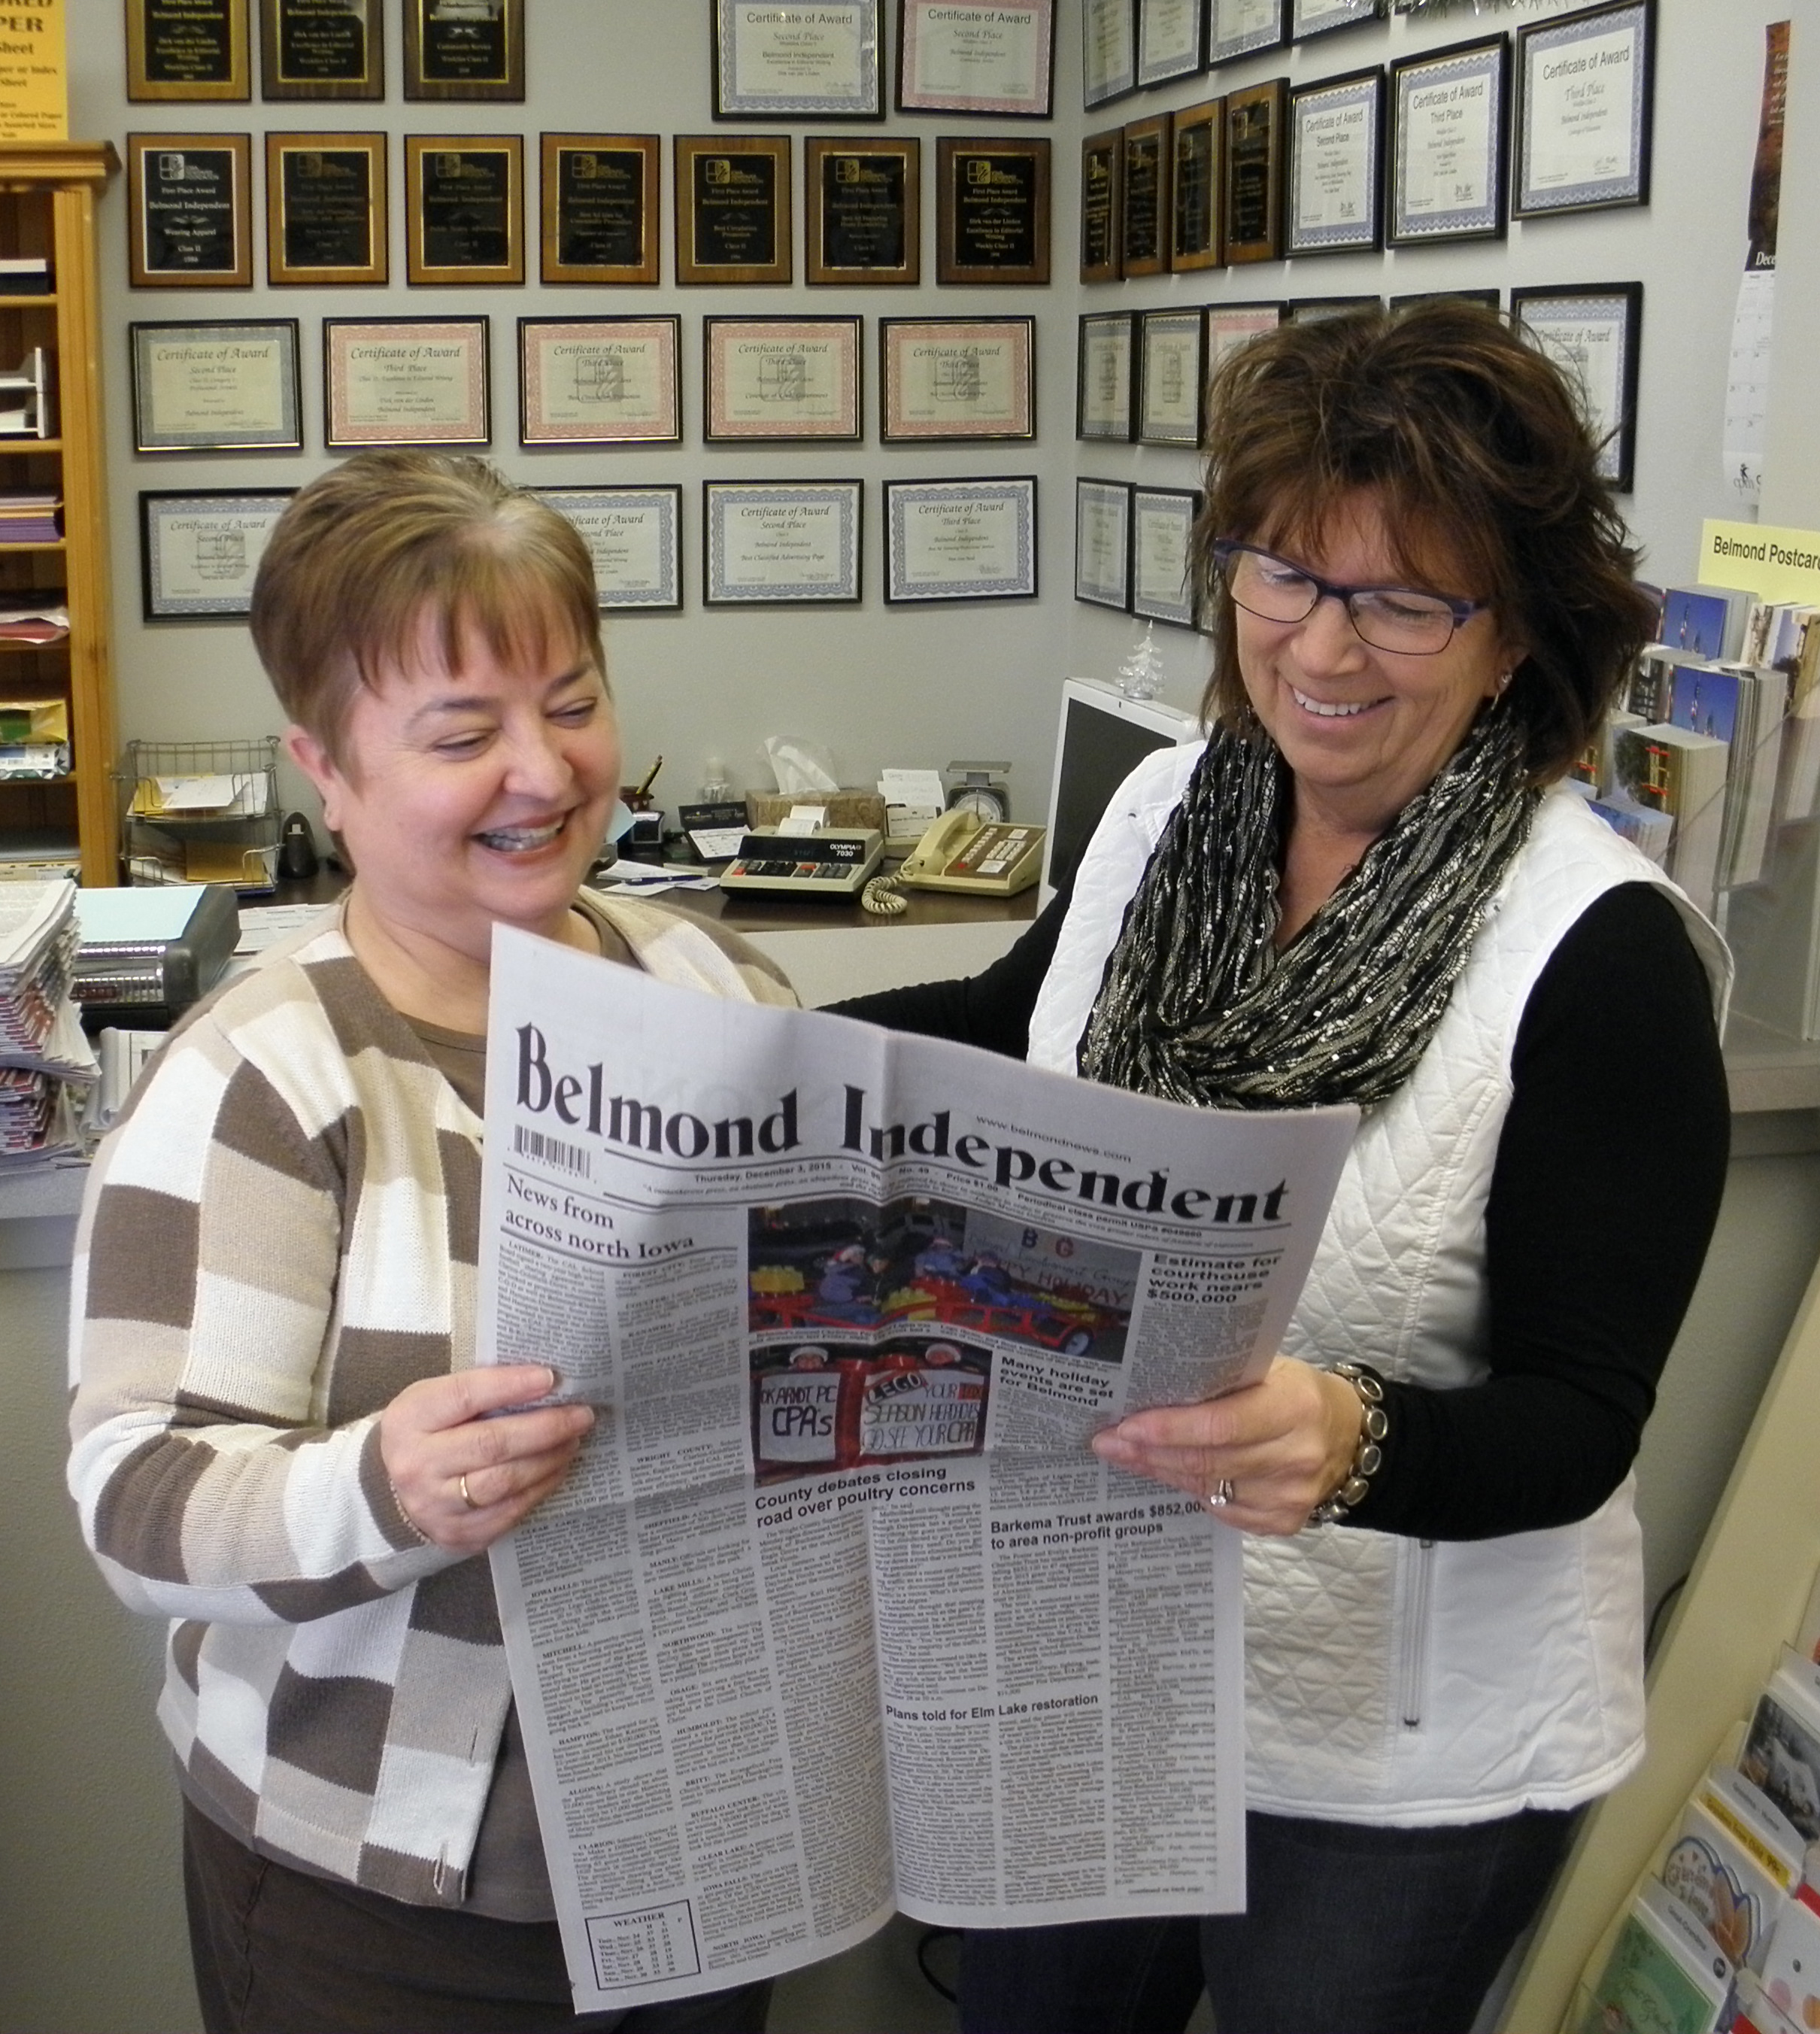 Lee van der Linden, ’80, (left) talks with Connie Mattison, owner of the Klemme House Bed and Breakfast in Belmond, Iowa. Mattison advertises in the Belmond Independent, which Lee and her husband Dirk, ’78, have owned for 30 years. Courtesy of Lee van der Linden